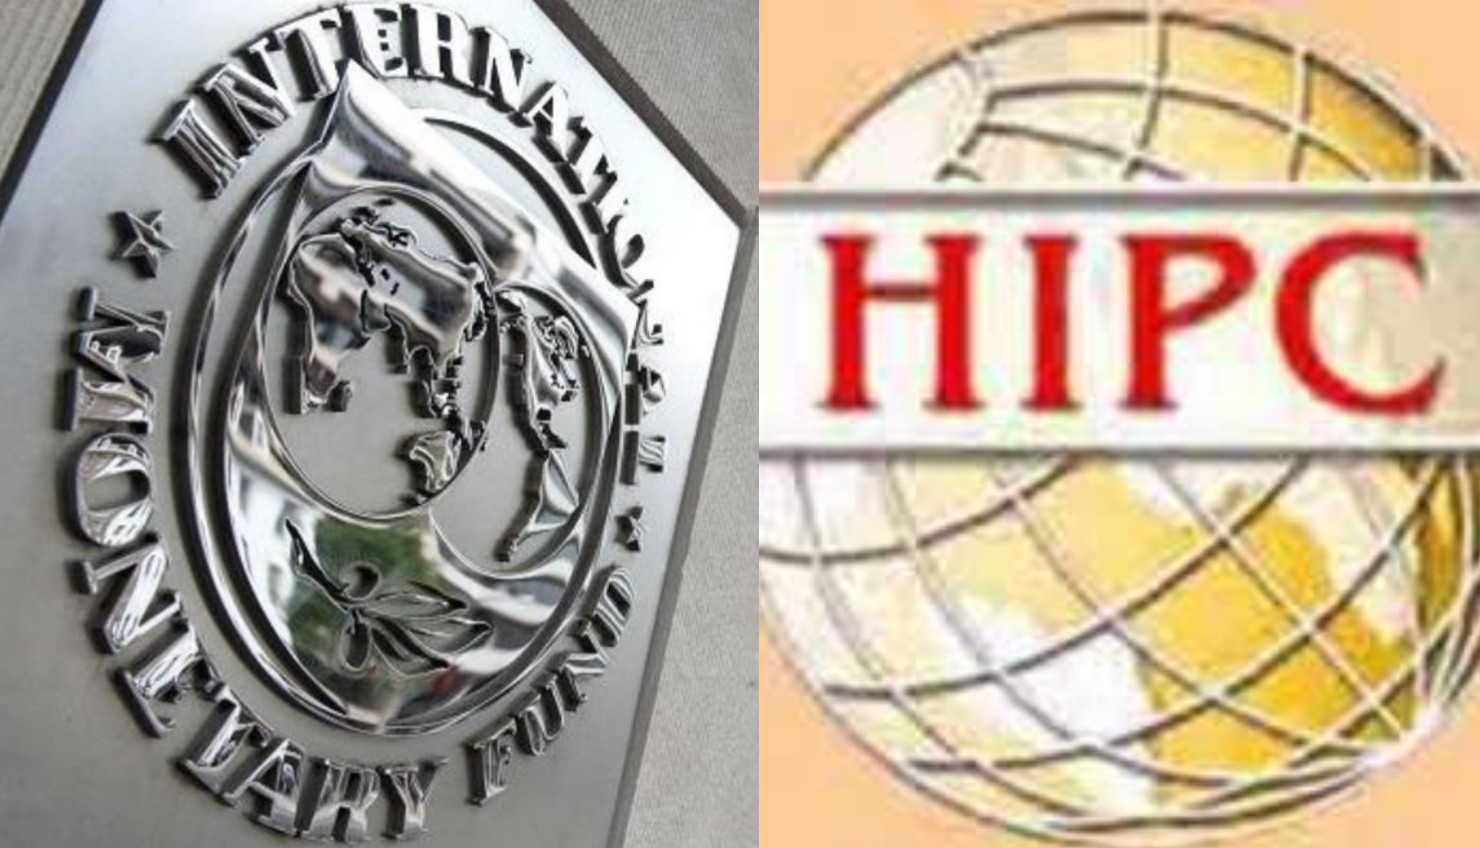 Report that classifies Ghana as HIPC is flawed and deceptive---IMF